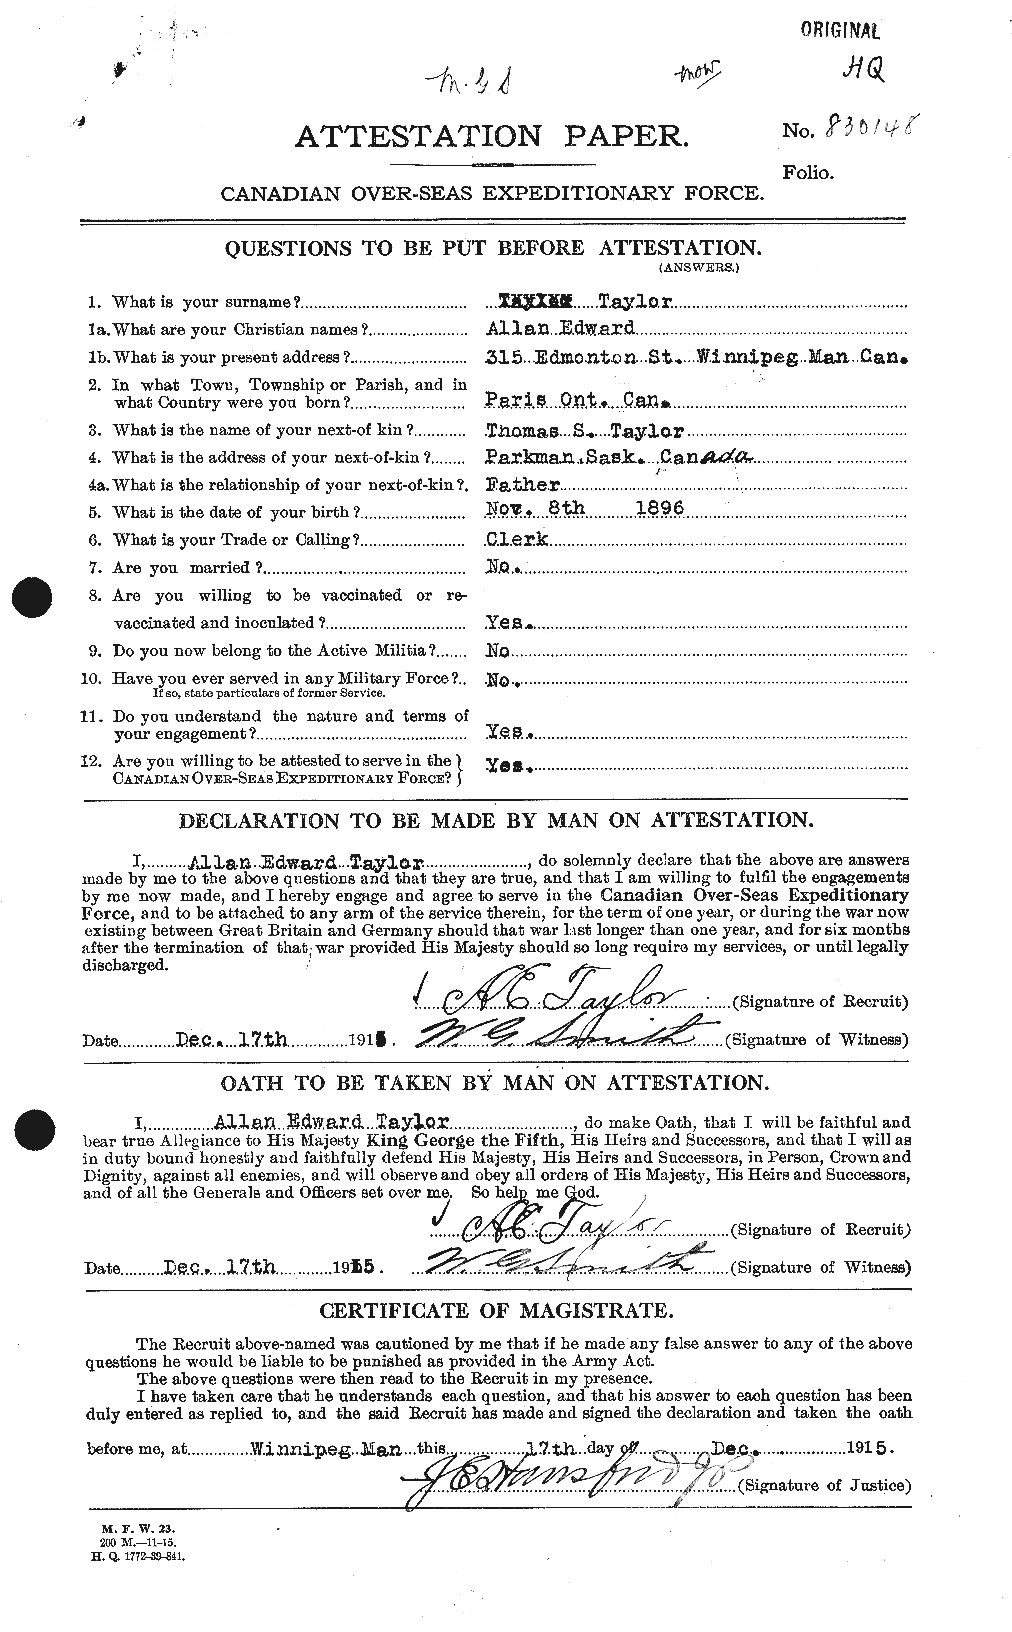 Personnel Records of the First World War - CEF 626203a